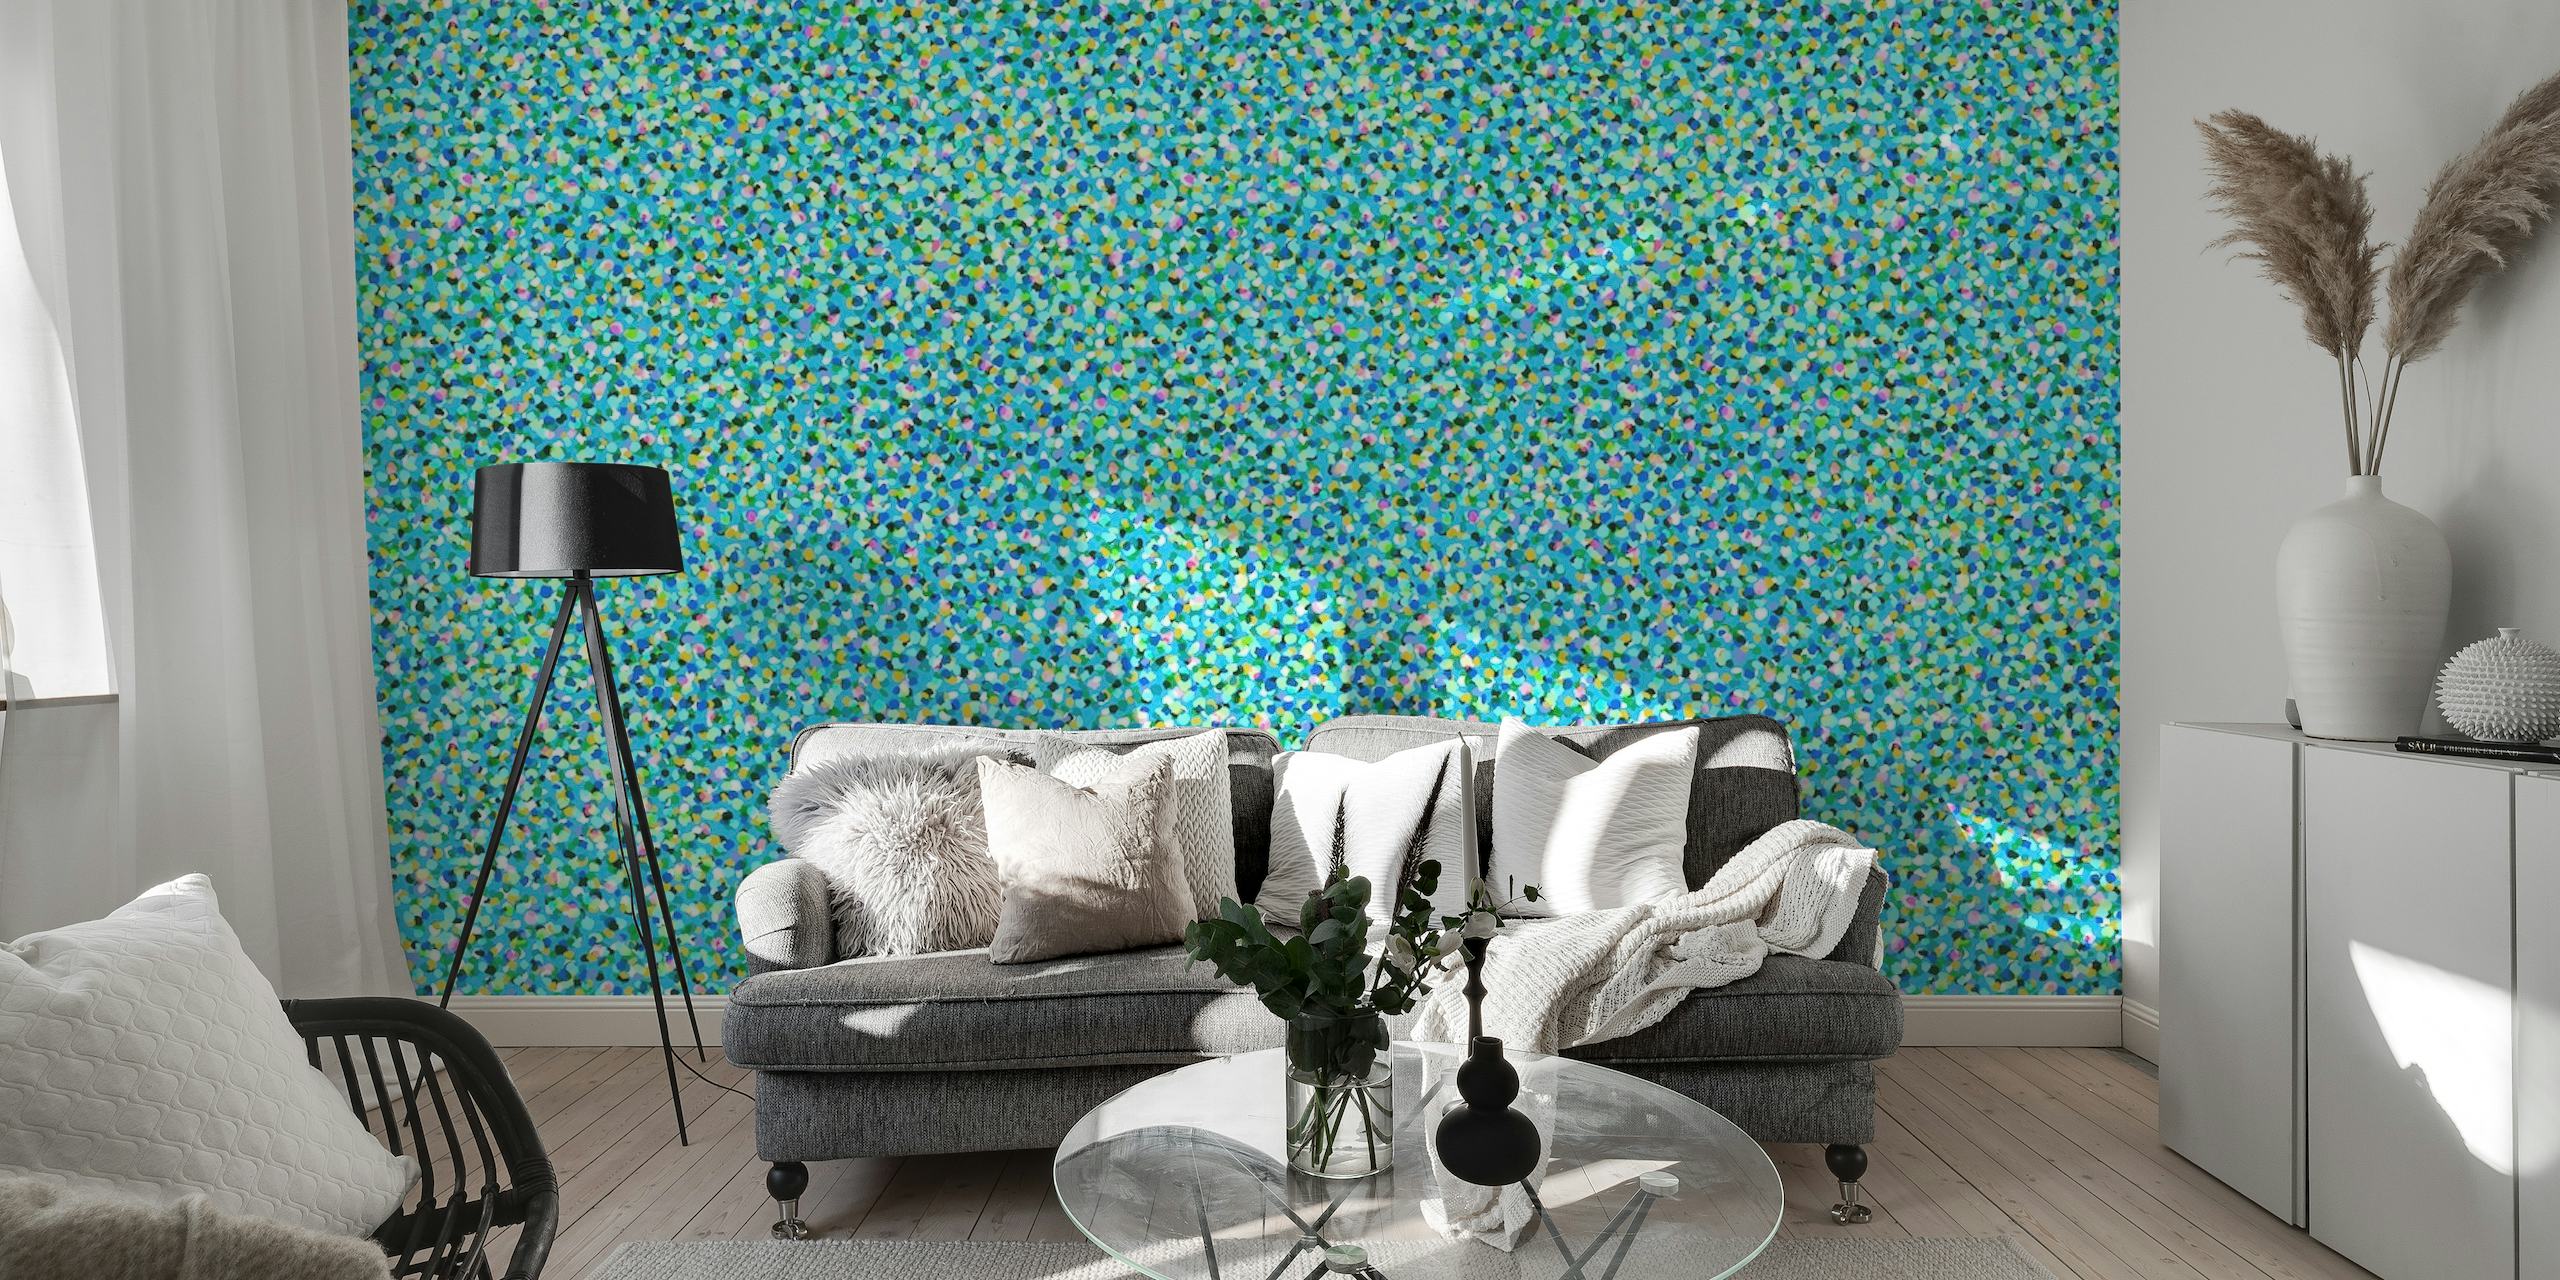 Vibrant confetti-style 'Party Spot Turquoise' wall mural with turquoise and white specks on happywall.com